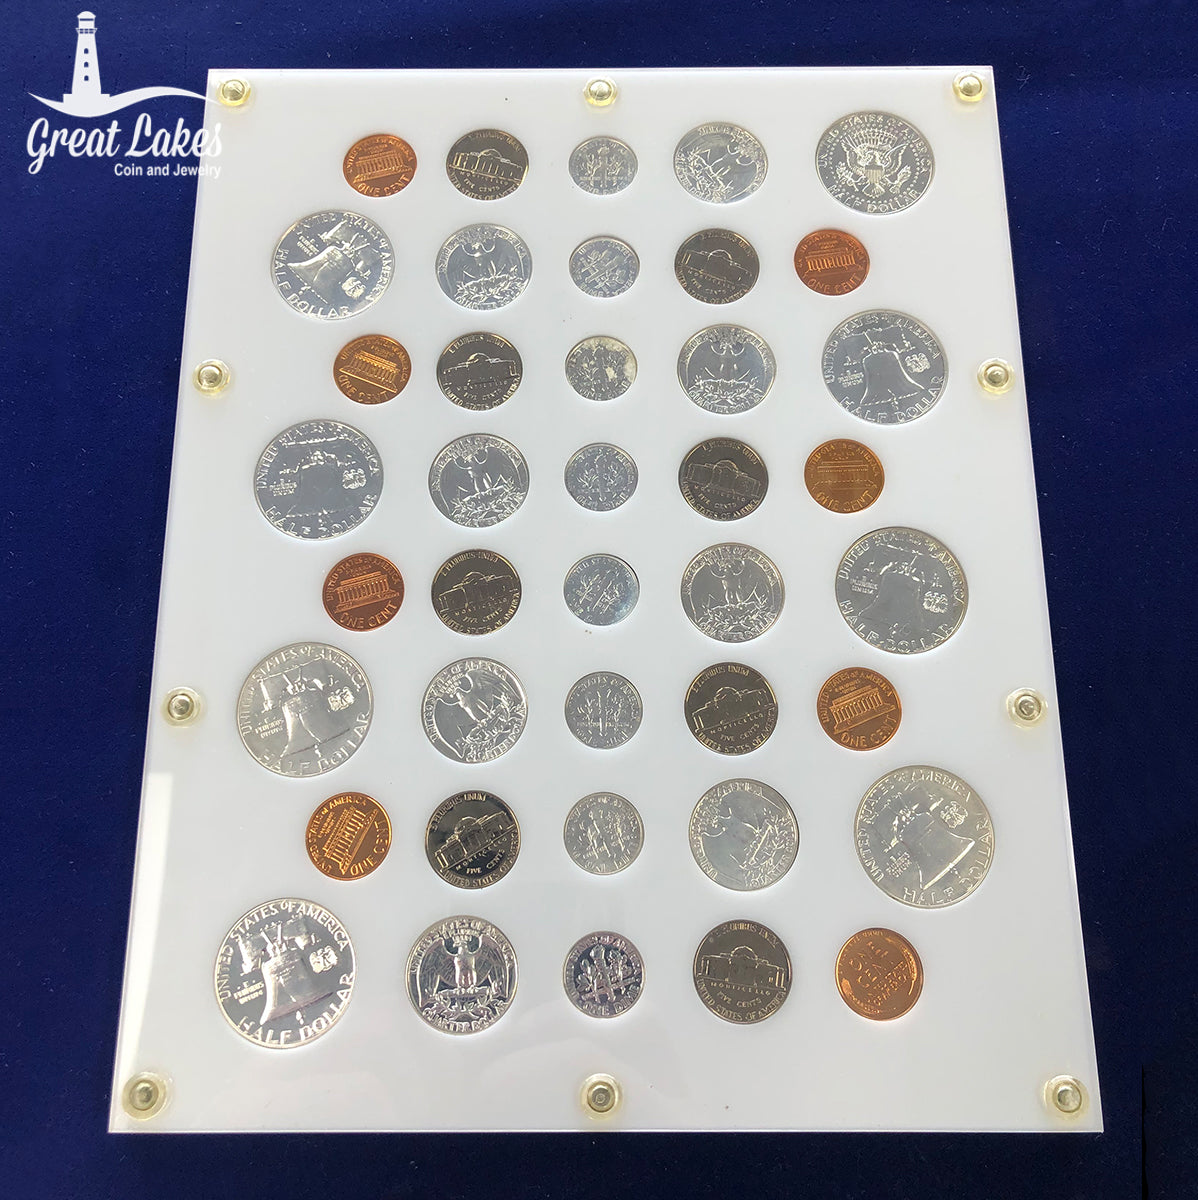 1958-1964 Silver Proof Sets in Capital Plastic Holder